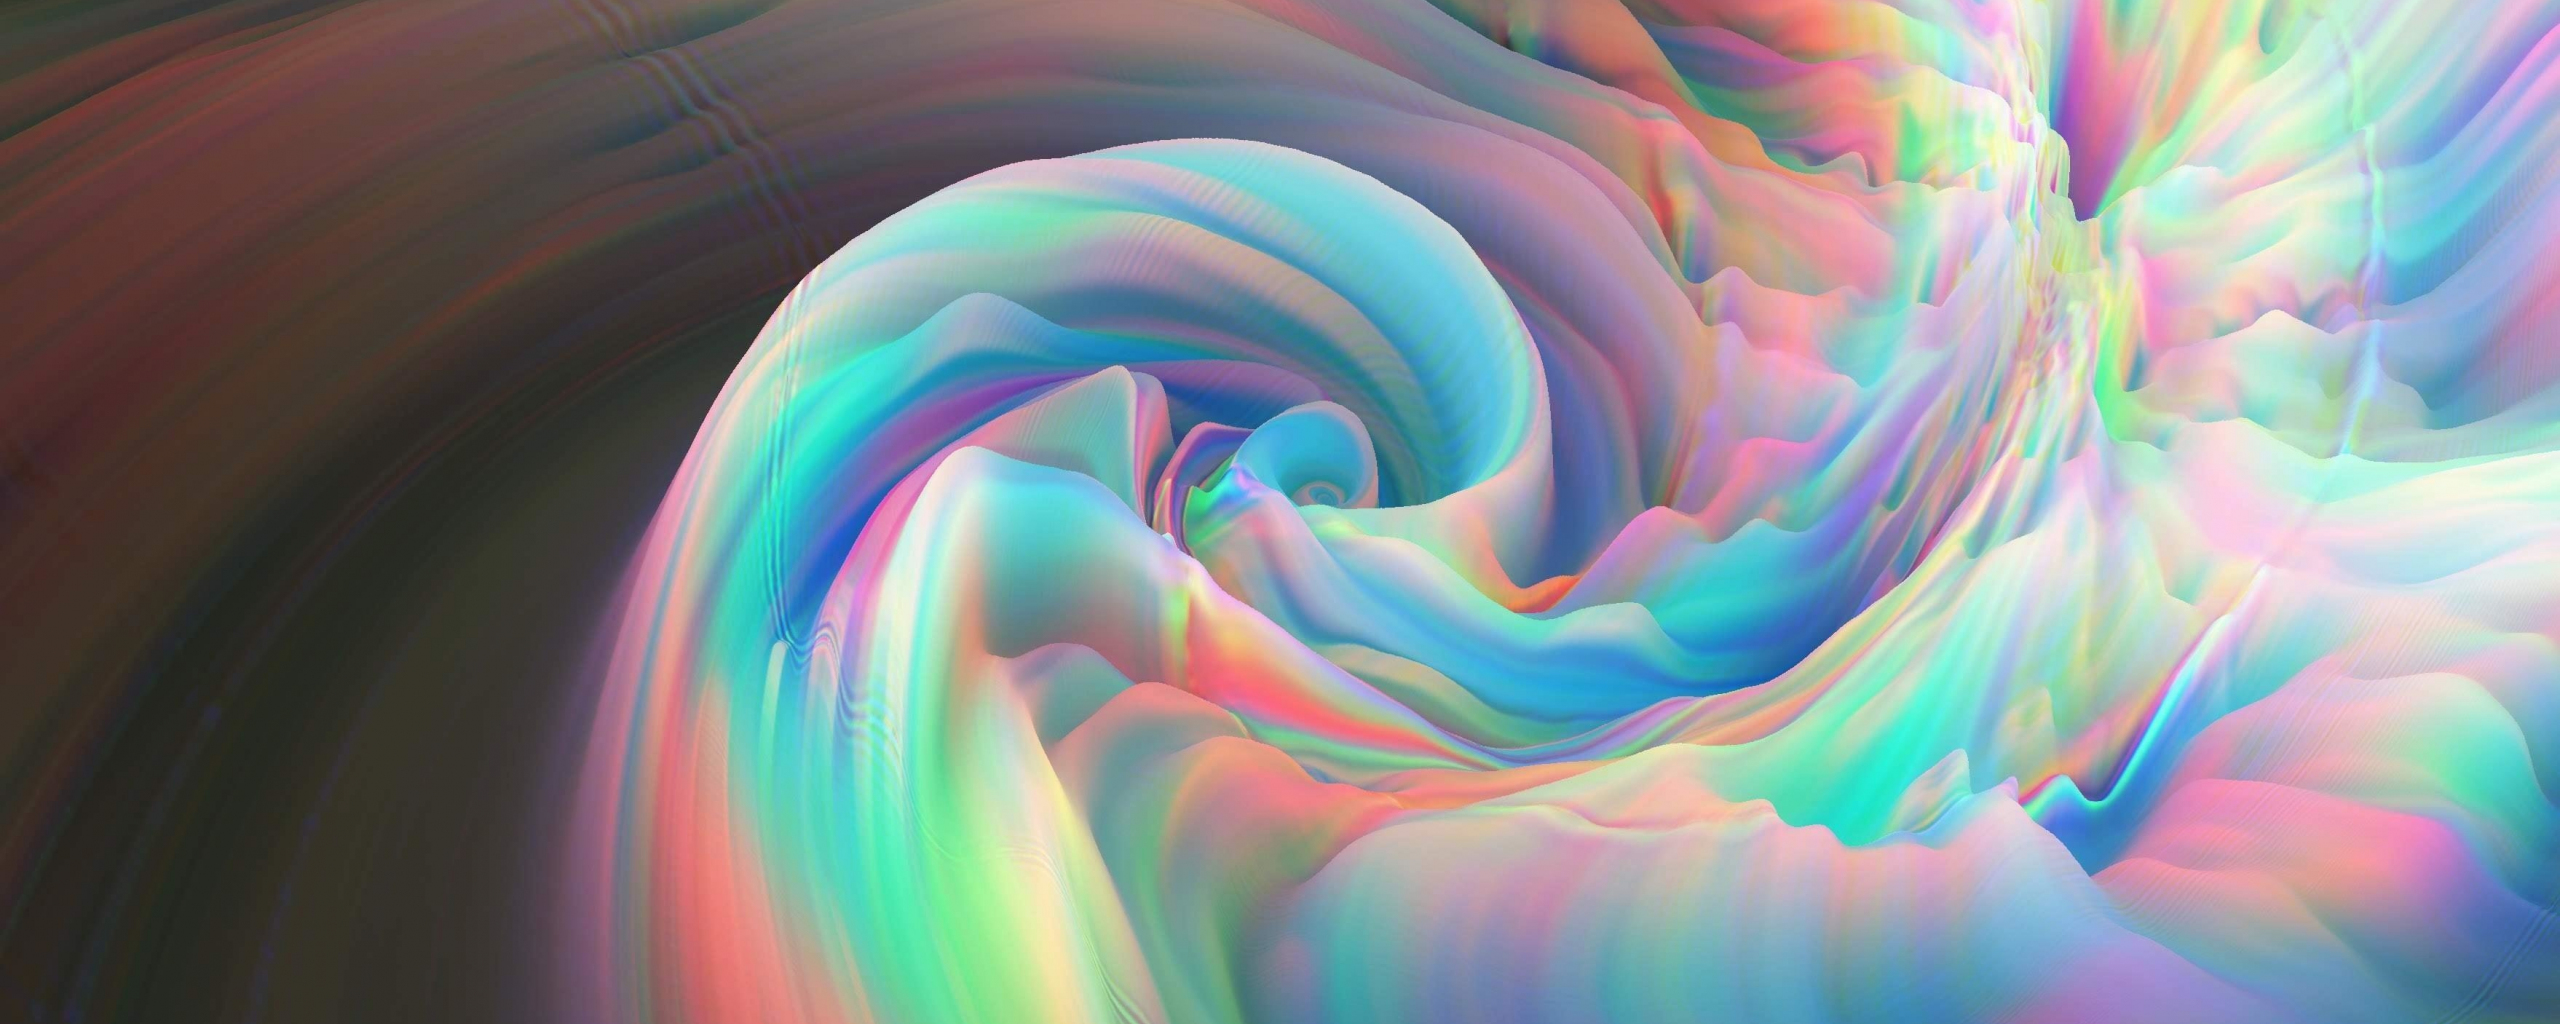 Glitch art, colorful swirl, abstraction, 2560x1024 wallpaper